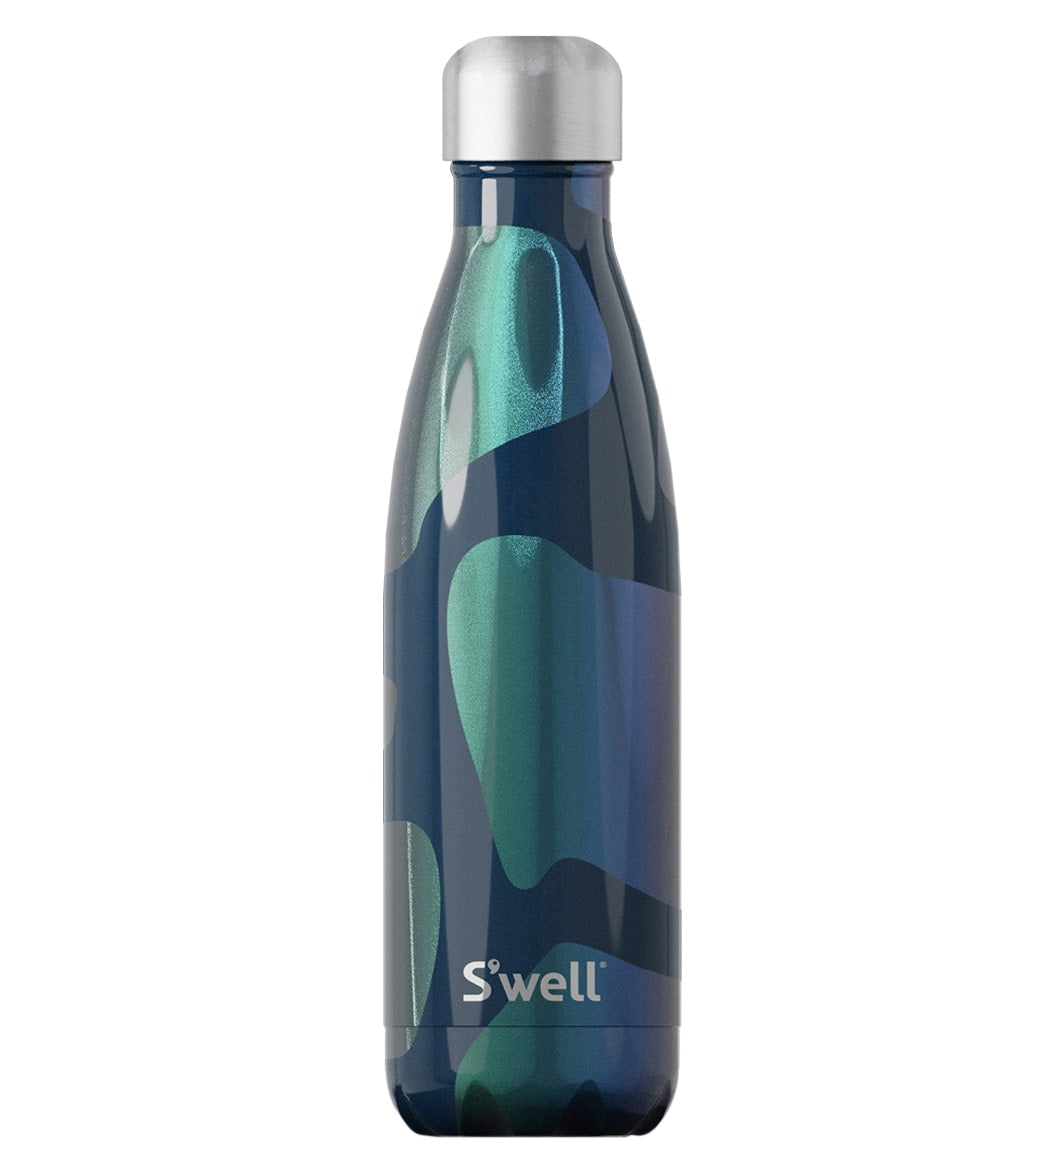 S'well 17 oz Stainless Steel Water Bottle Onyx